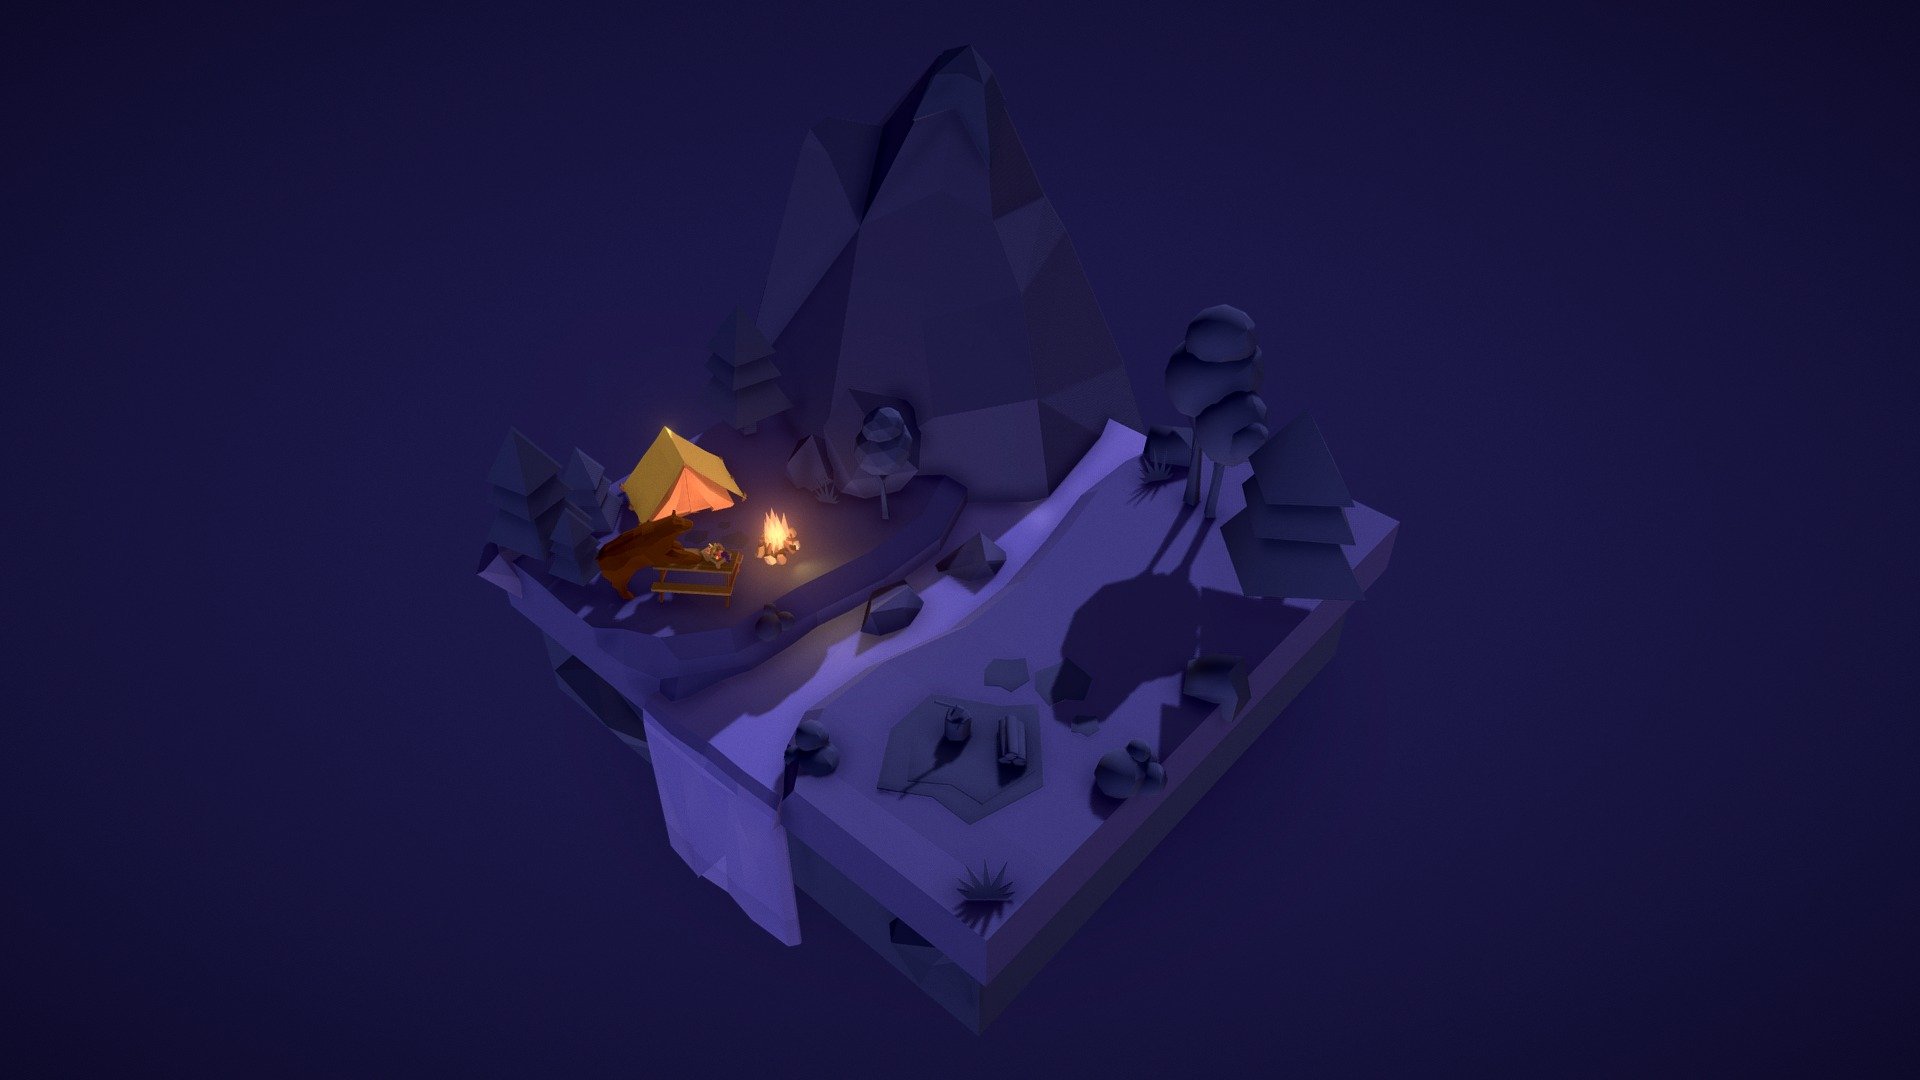 Low poly landscape featuring a tent, river, picnic basket, a grizzly bear and many other cool stuff.

Series 1/3
Day, Evening and Night

Whole project &amp; photos at Behance - Camping Weekend (Night) - Low poly landscape - 3D model by Remedio Chino (@remediochino) 3d model